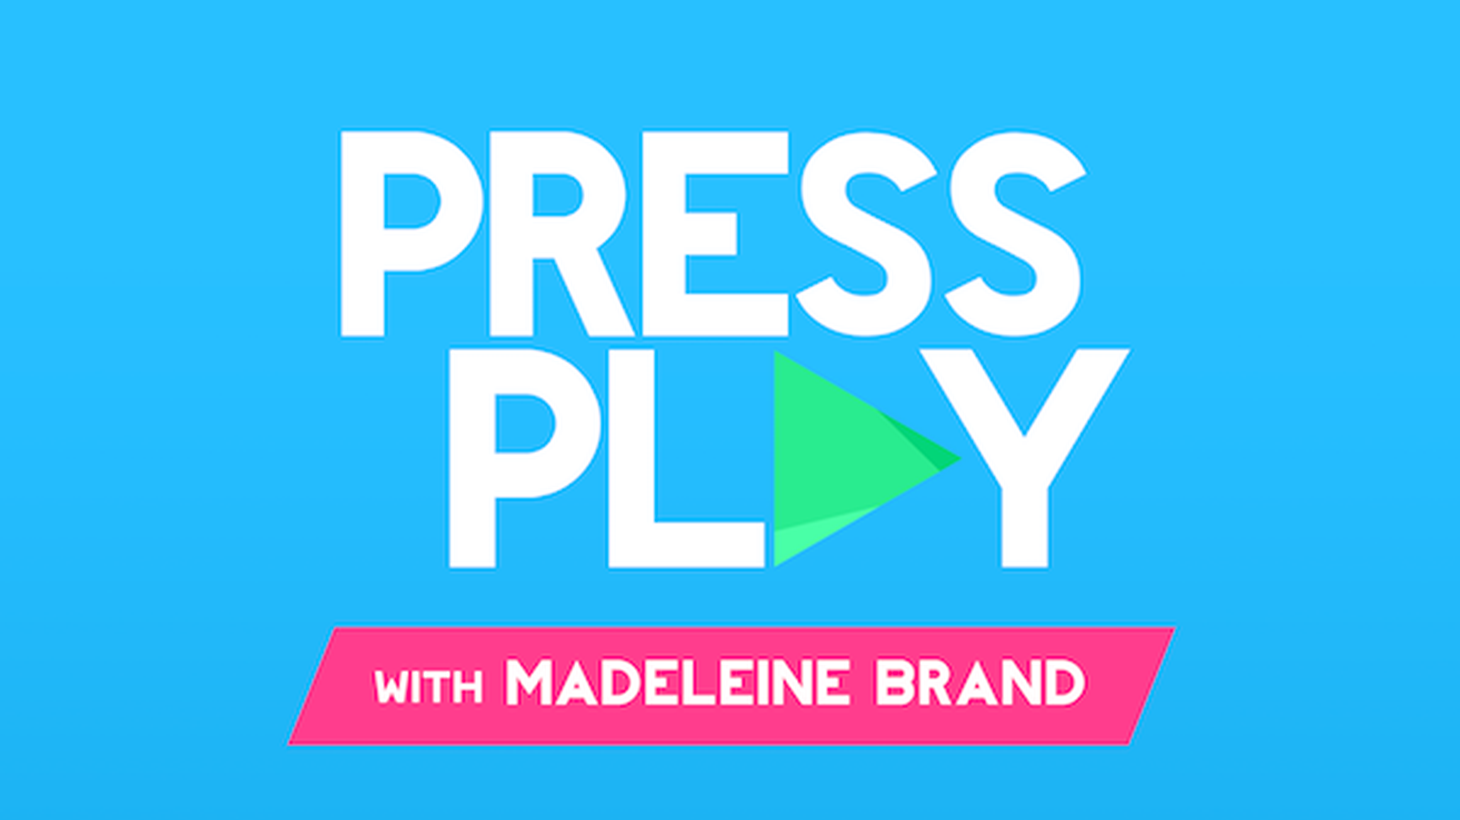 On today's Press Play: Defending same-sex marriage, declining milk sales, the growing world of online dating, secrets of the Vatican, and TV rating struggles.